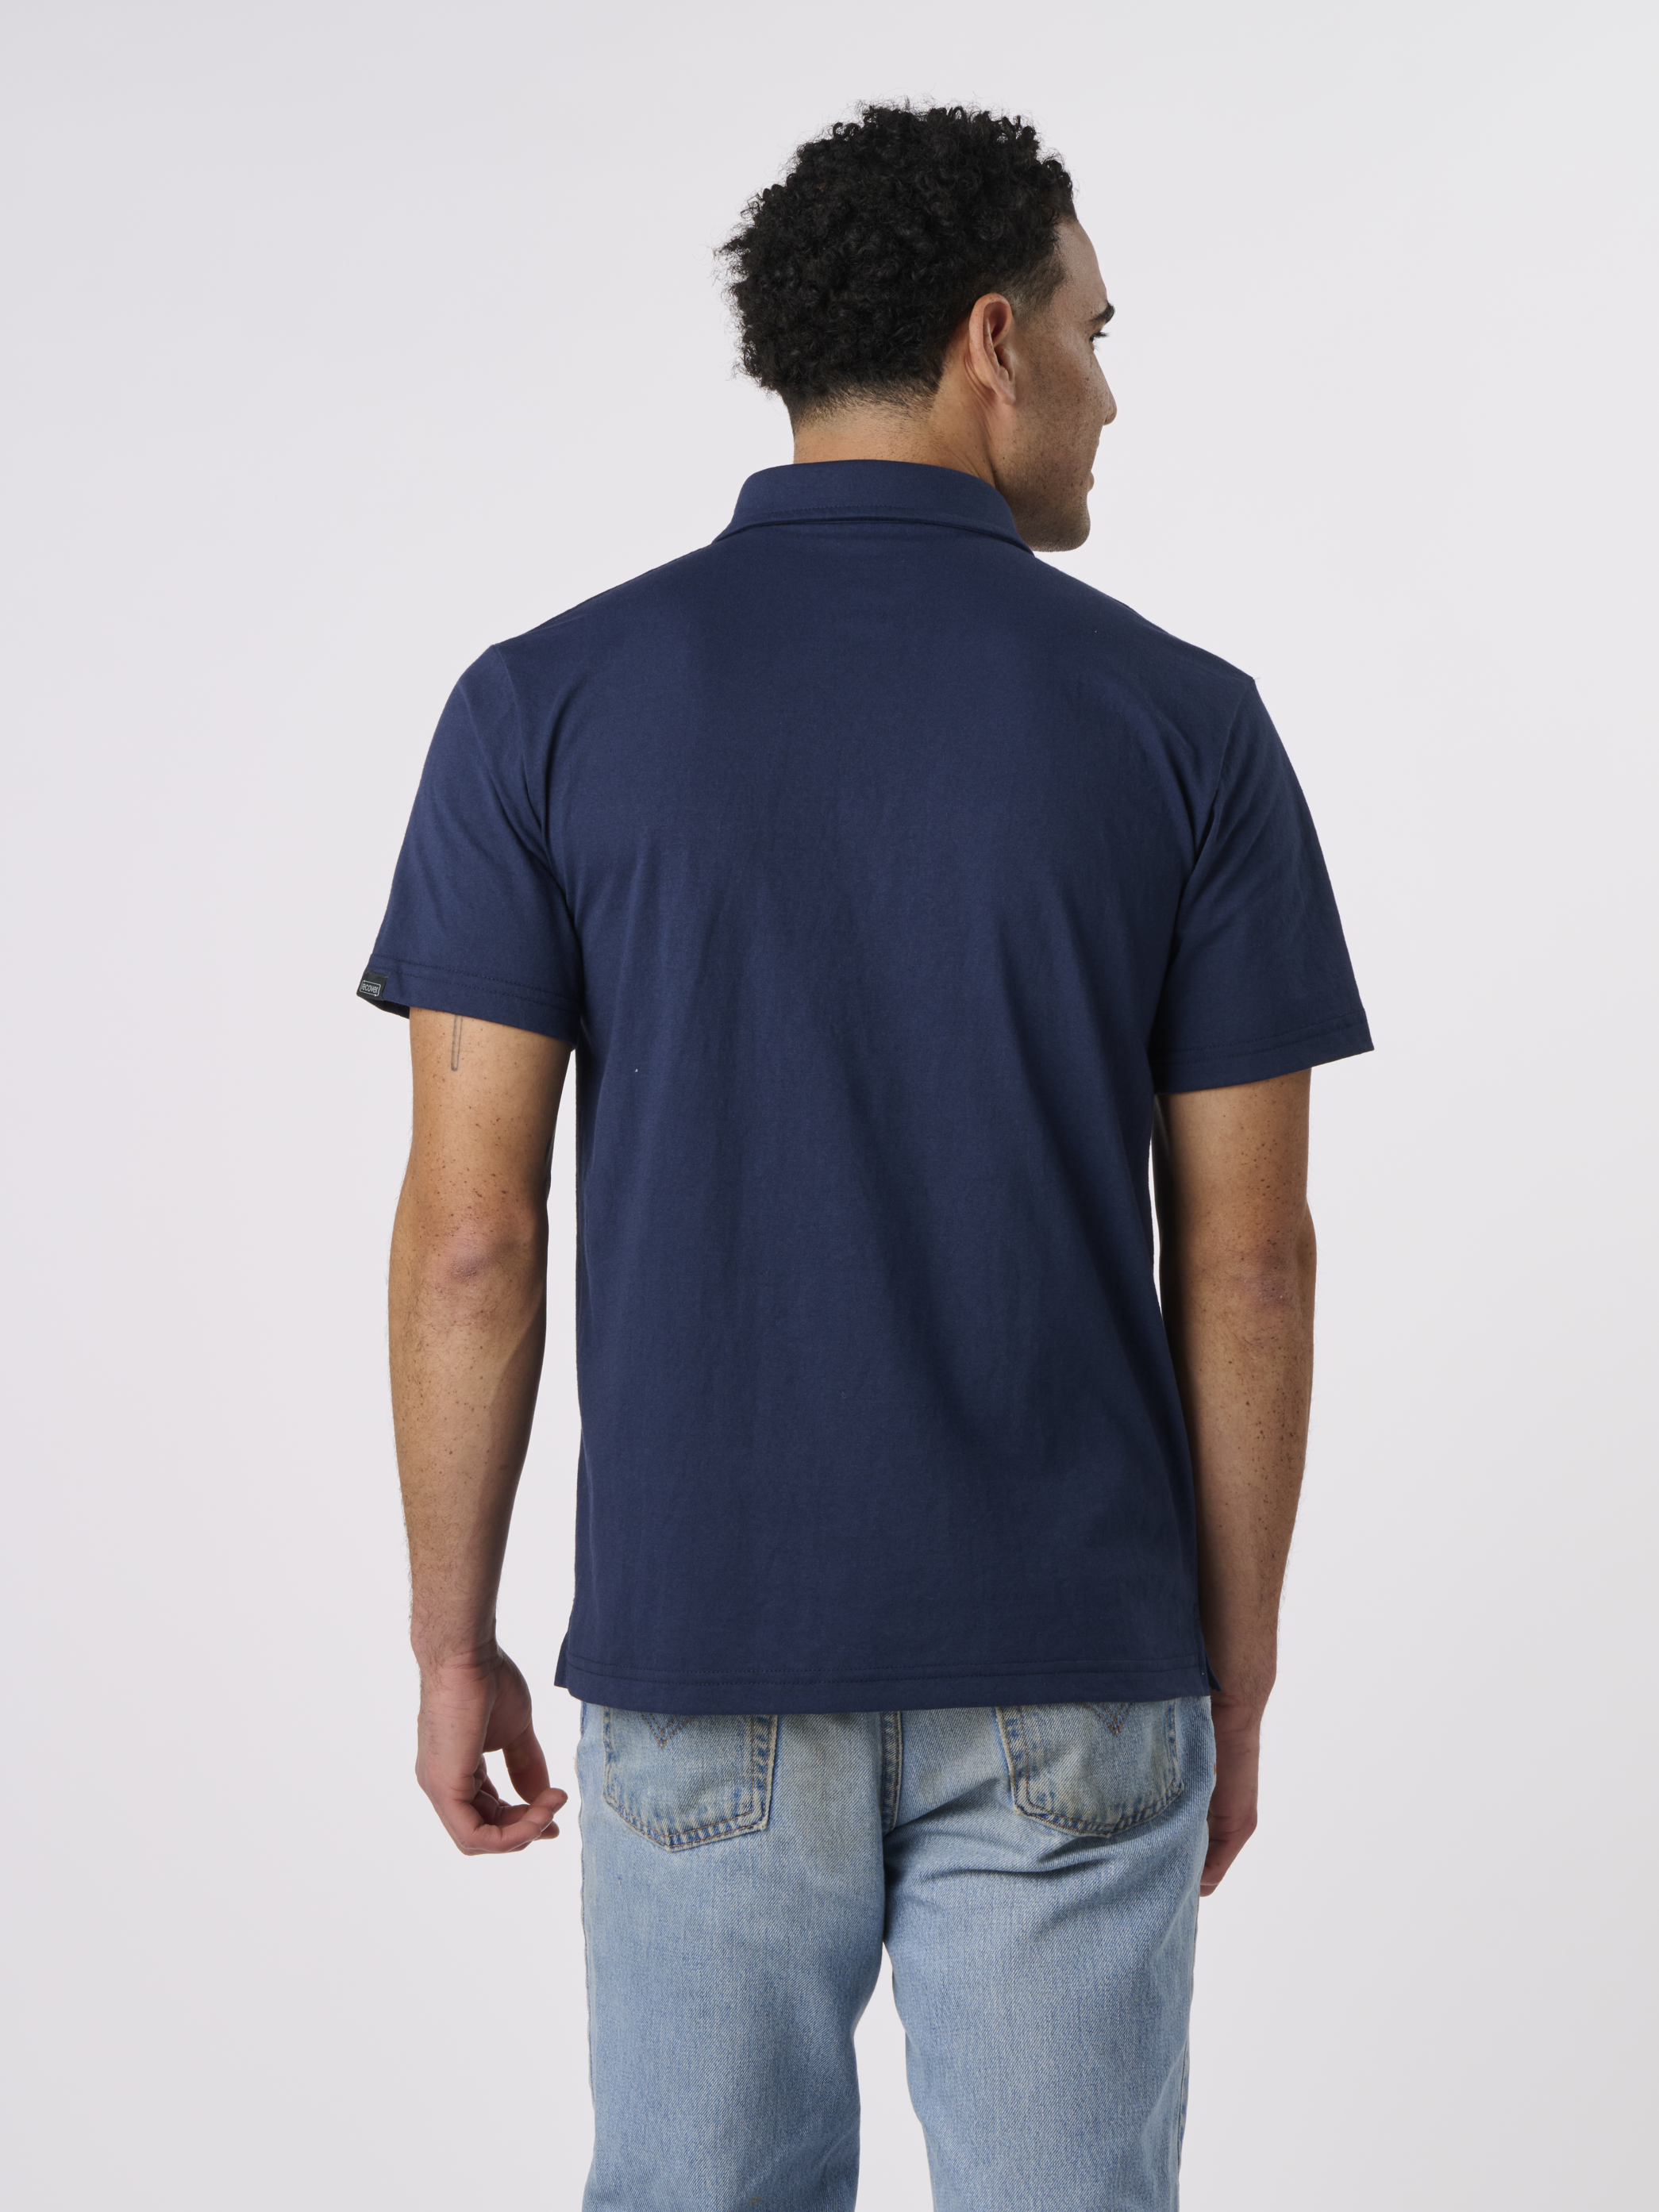 RECOVER_EC500_ECOPOLO_NAVY_BACK.png